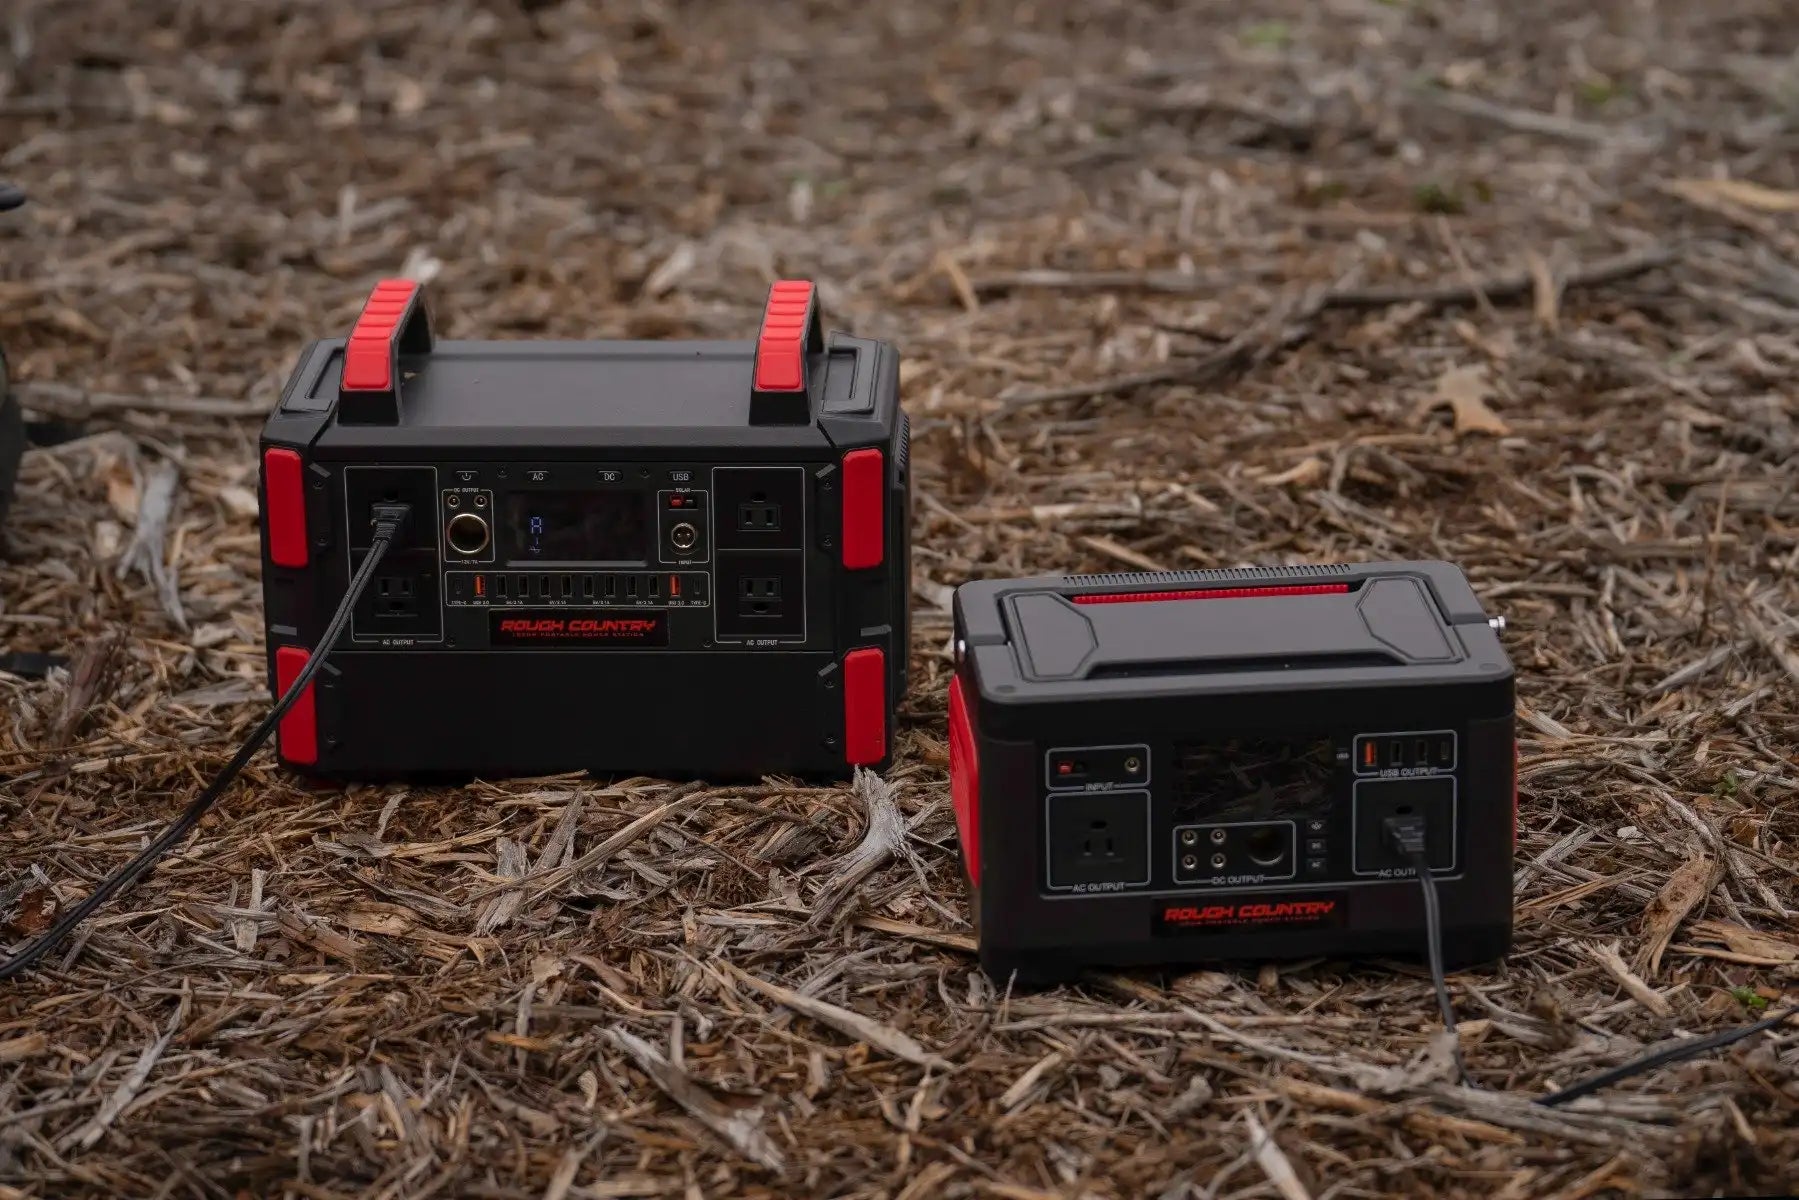 Rough Country Multifunctional Portable Power Station